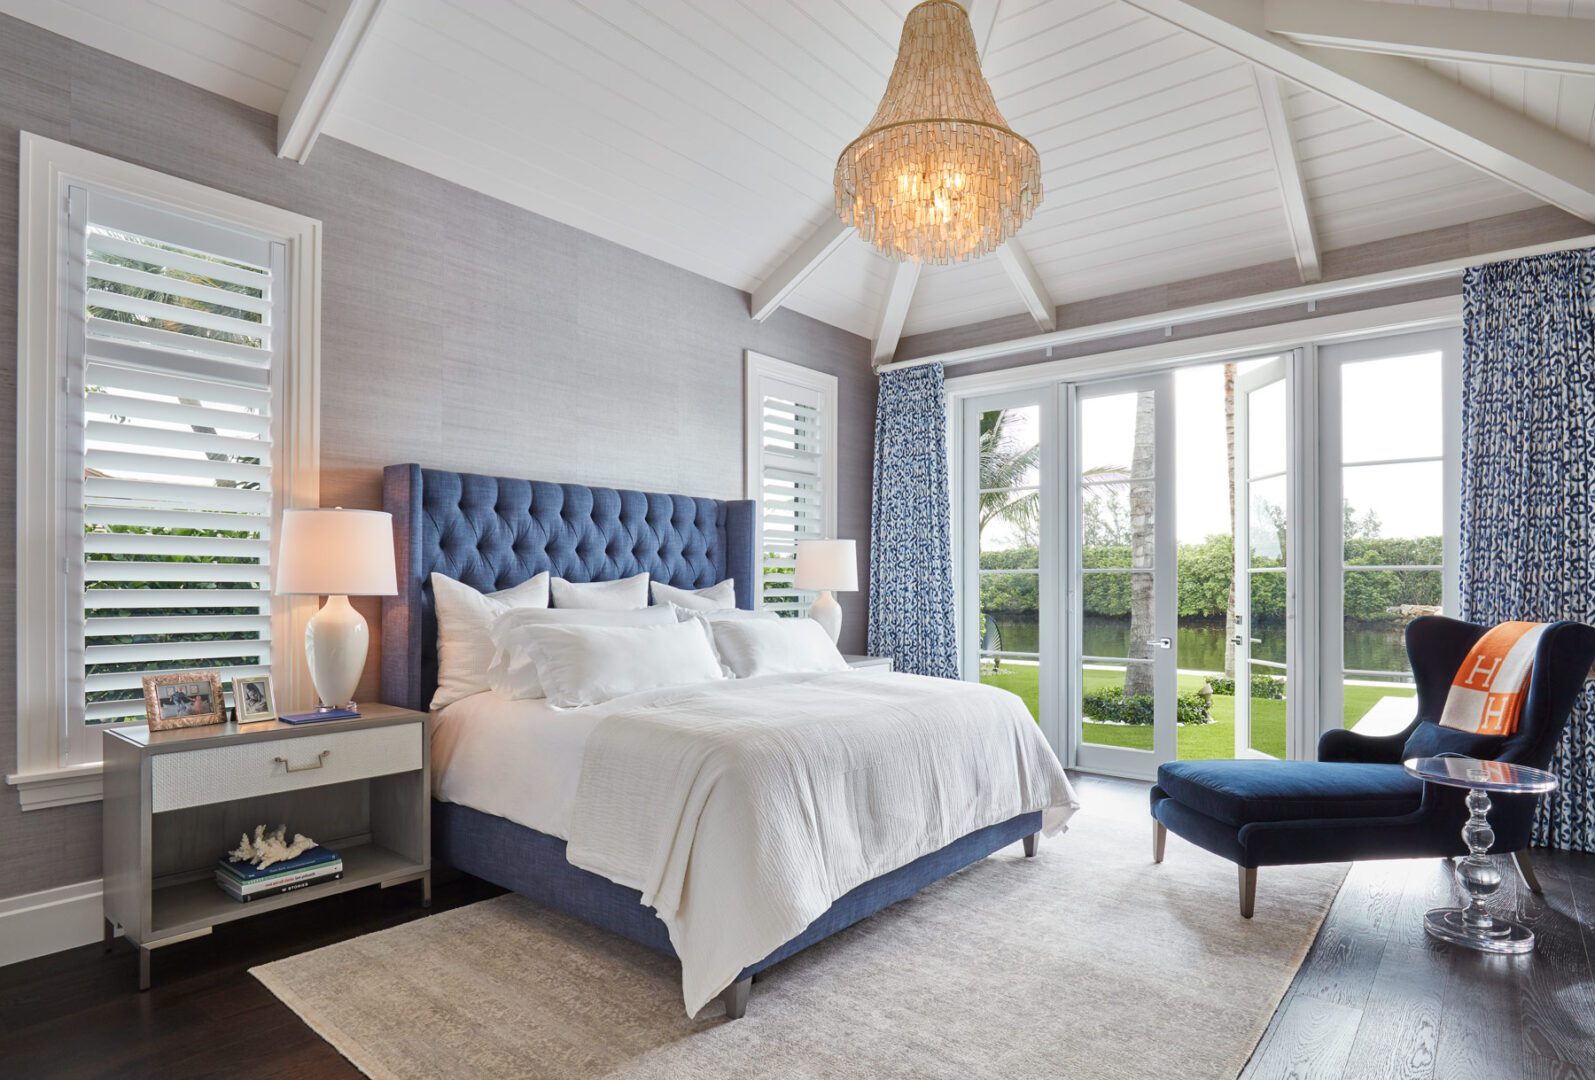 A bedroom with blue tufted headboard and white walls.